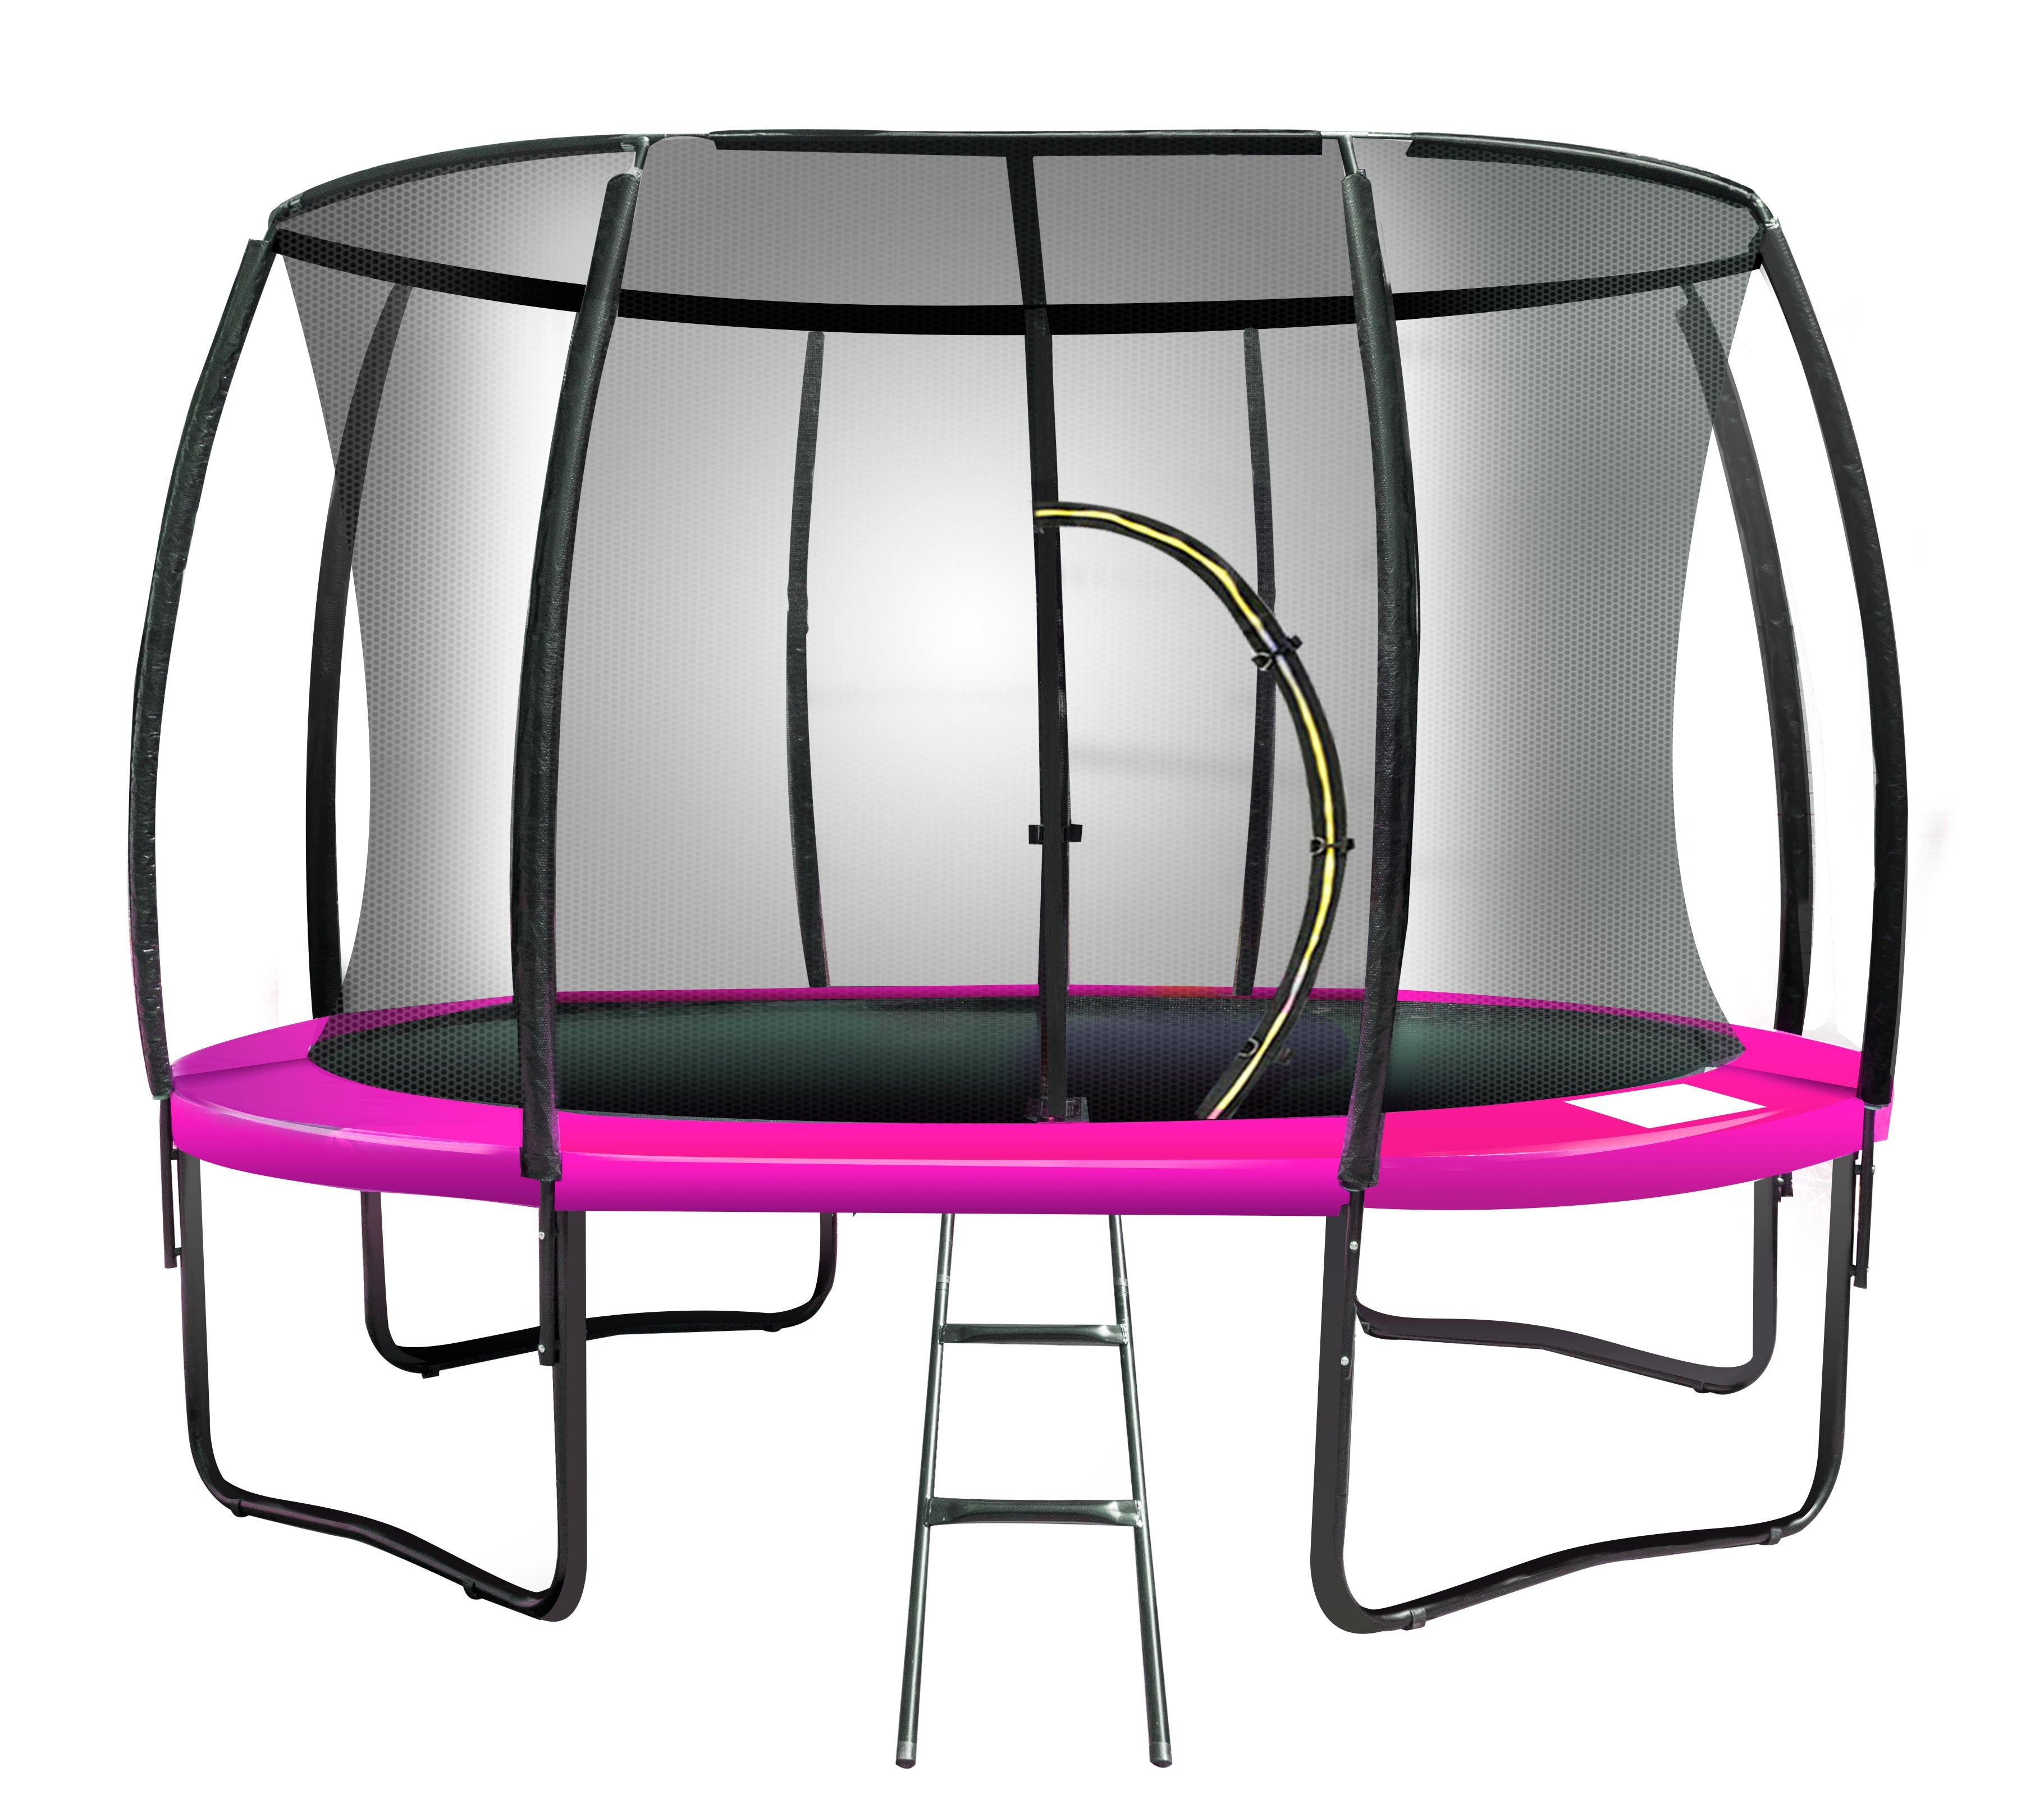 Kahuna 10ft Trampoline Free Ladder Spring Mat Net Safety Pad Cover Round Enclosure Pink - SILBERSHELL